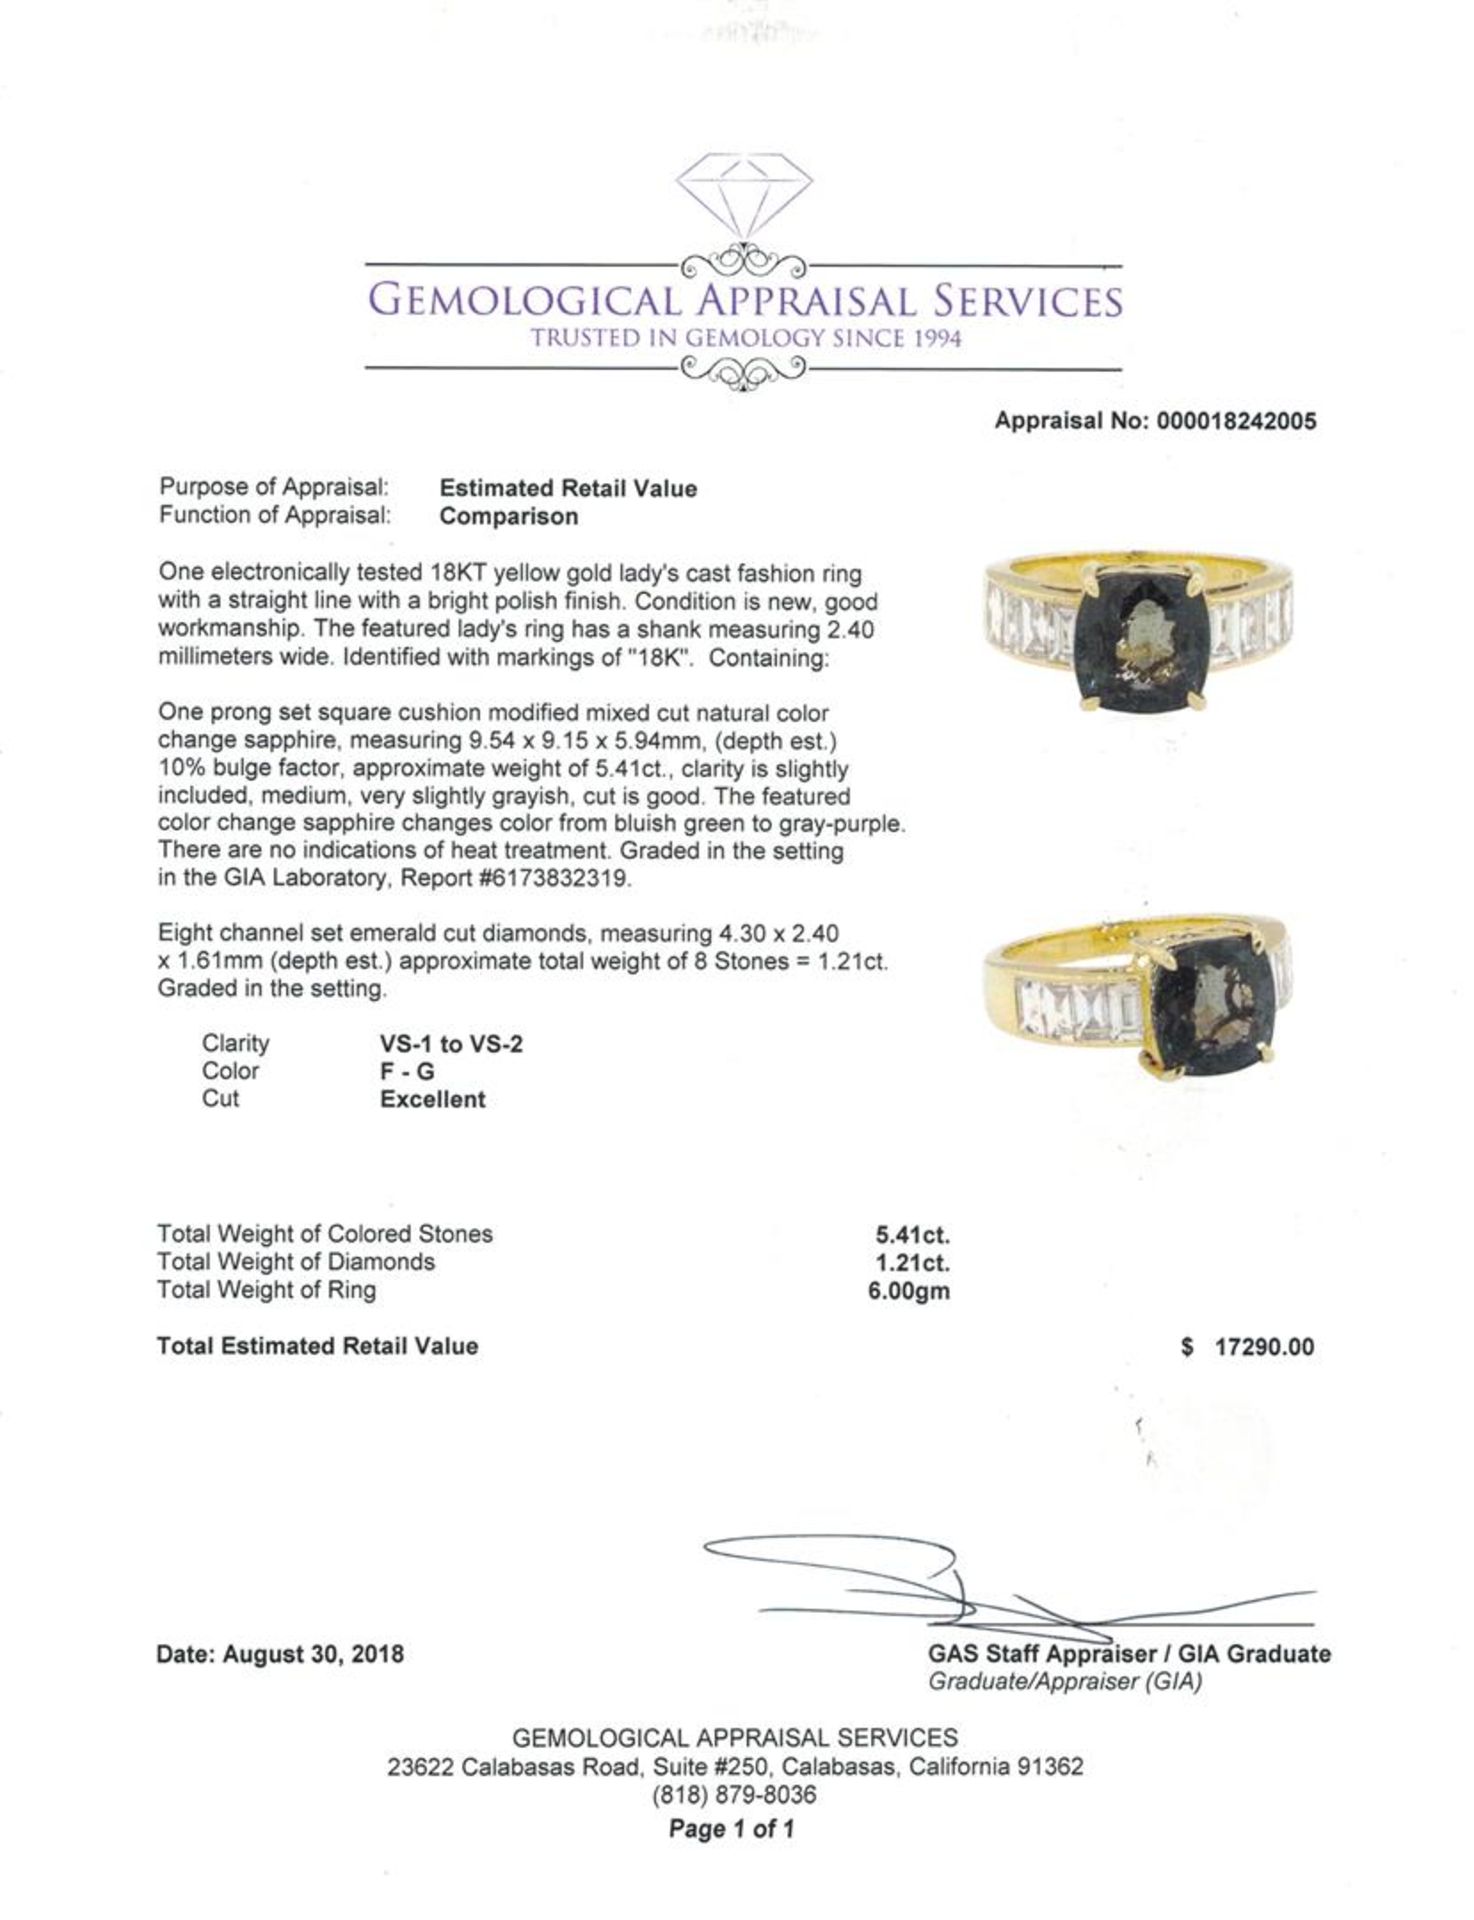 6.62 ctw Square Cushion Mixed Color Change Sapphire And Emerald Cut Diamond Ring - Image 5 of 5